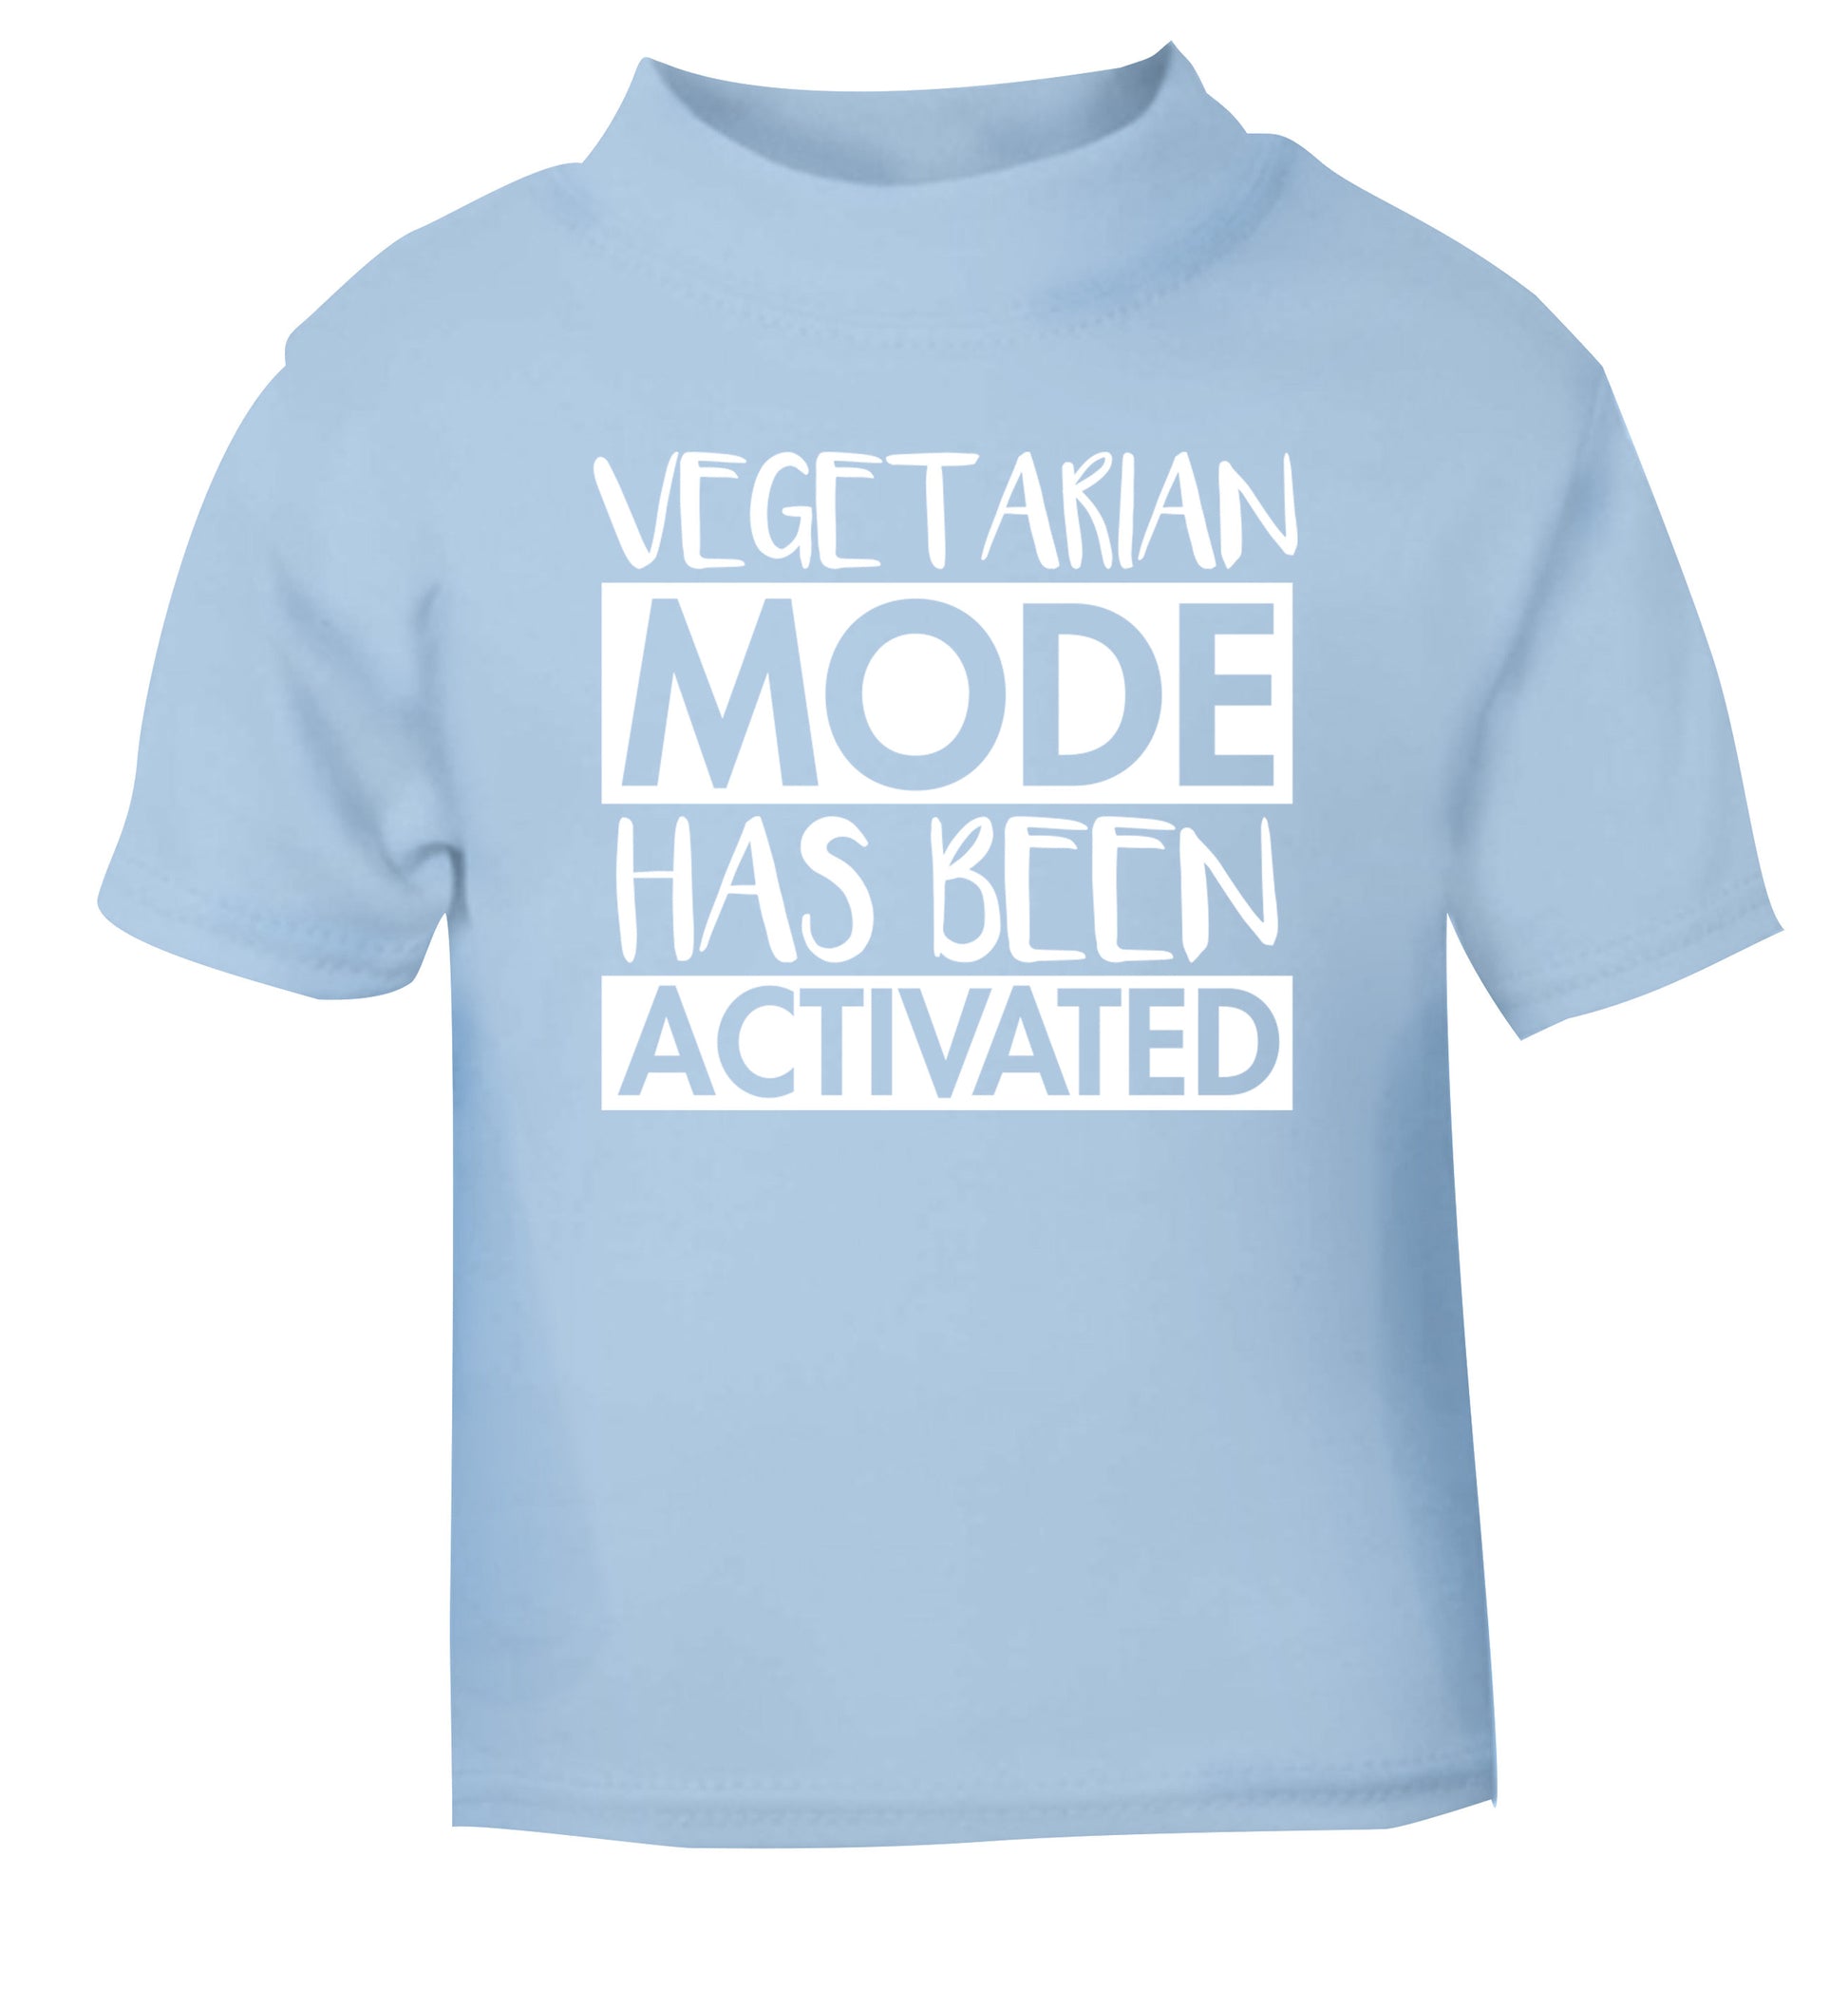 Vegetarian mode activated light blue Baby Toddler Tshirt 2 Years